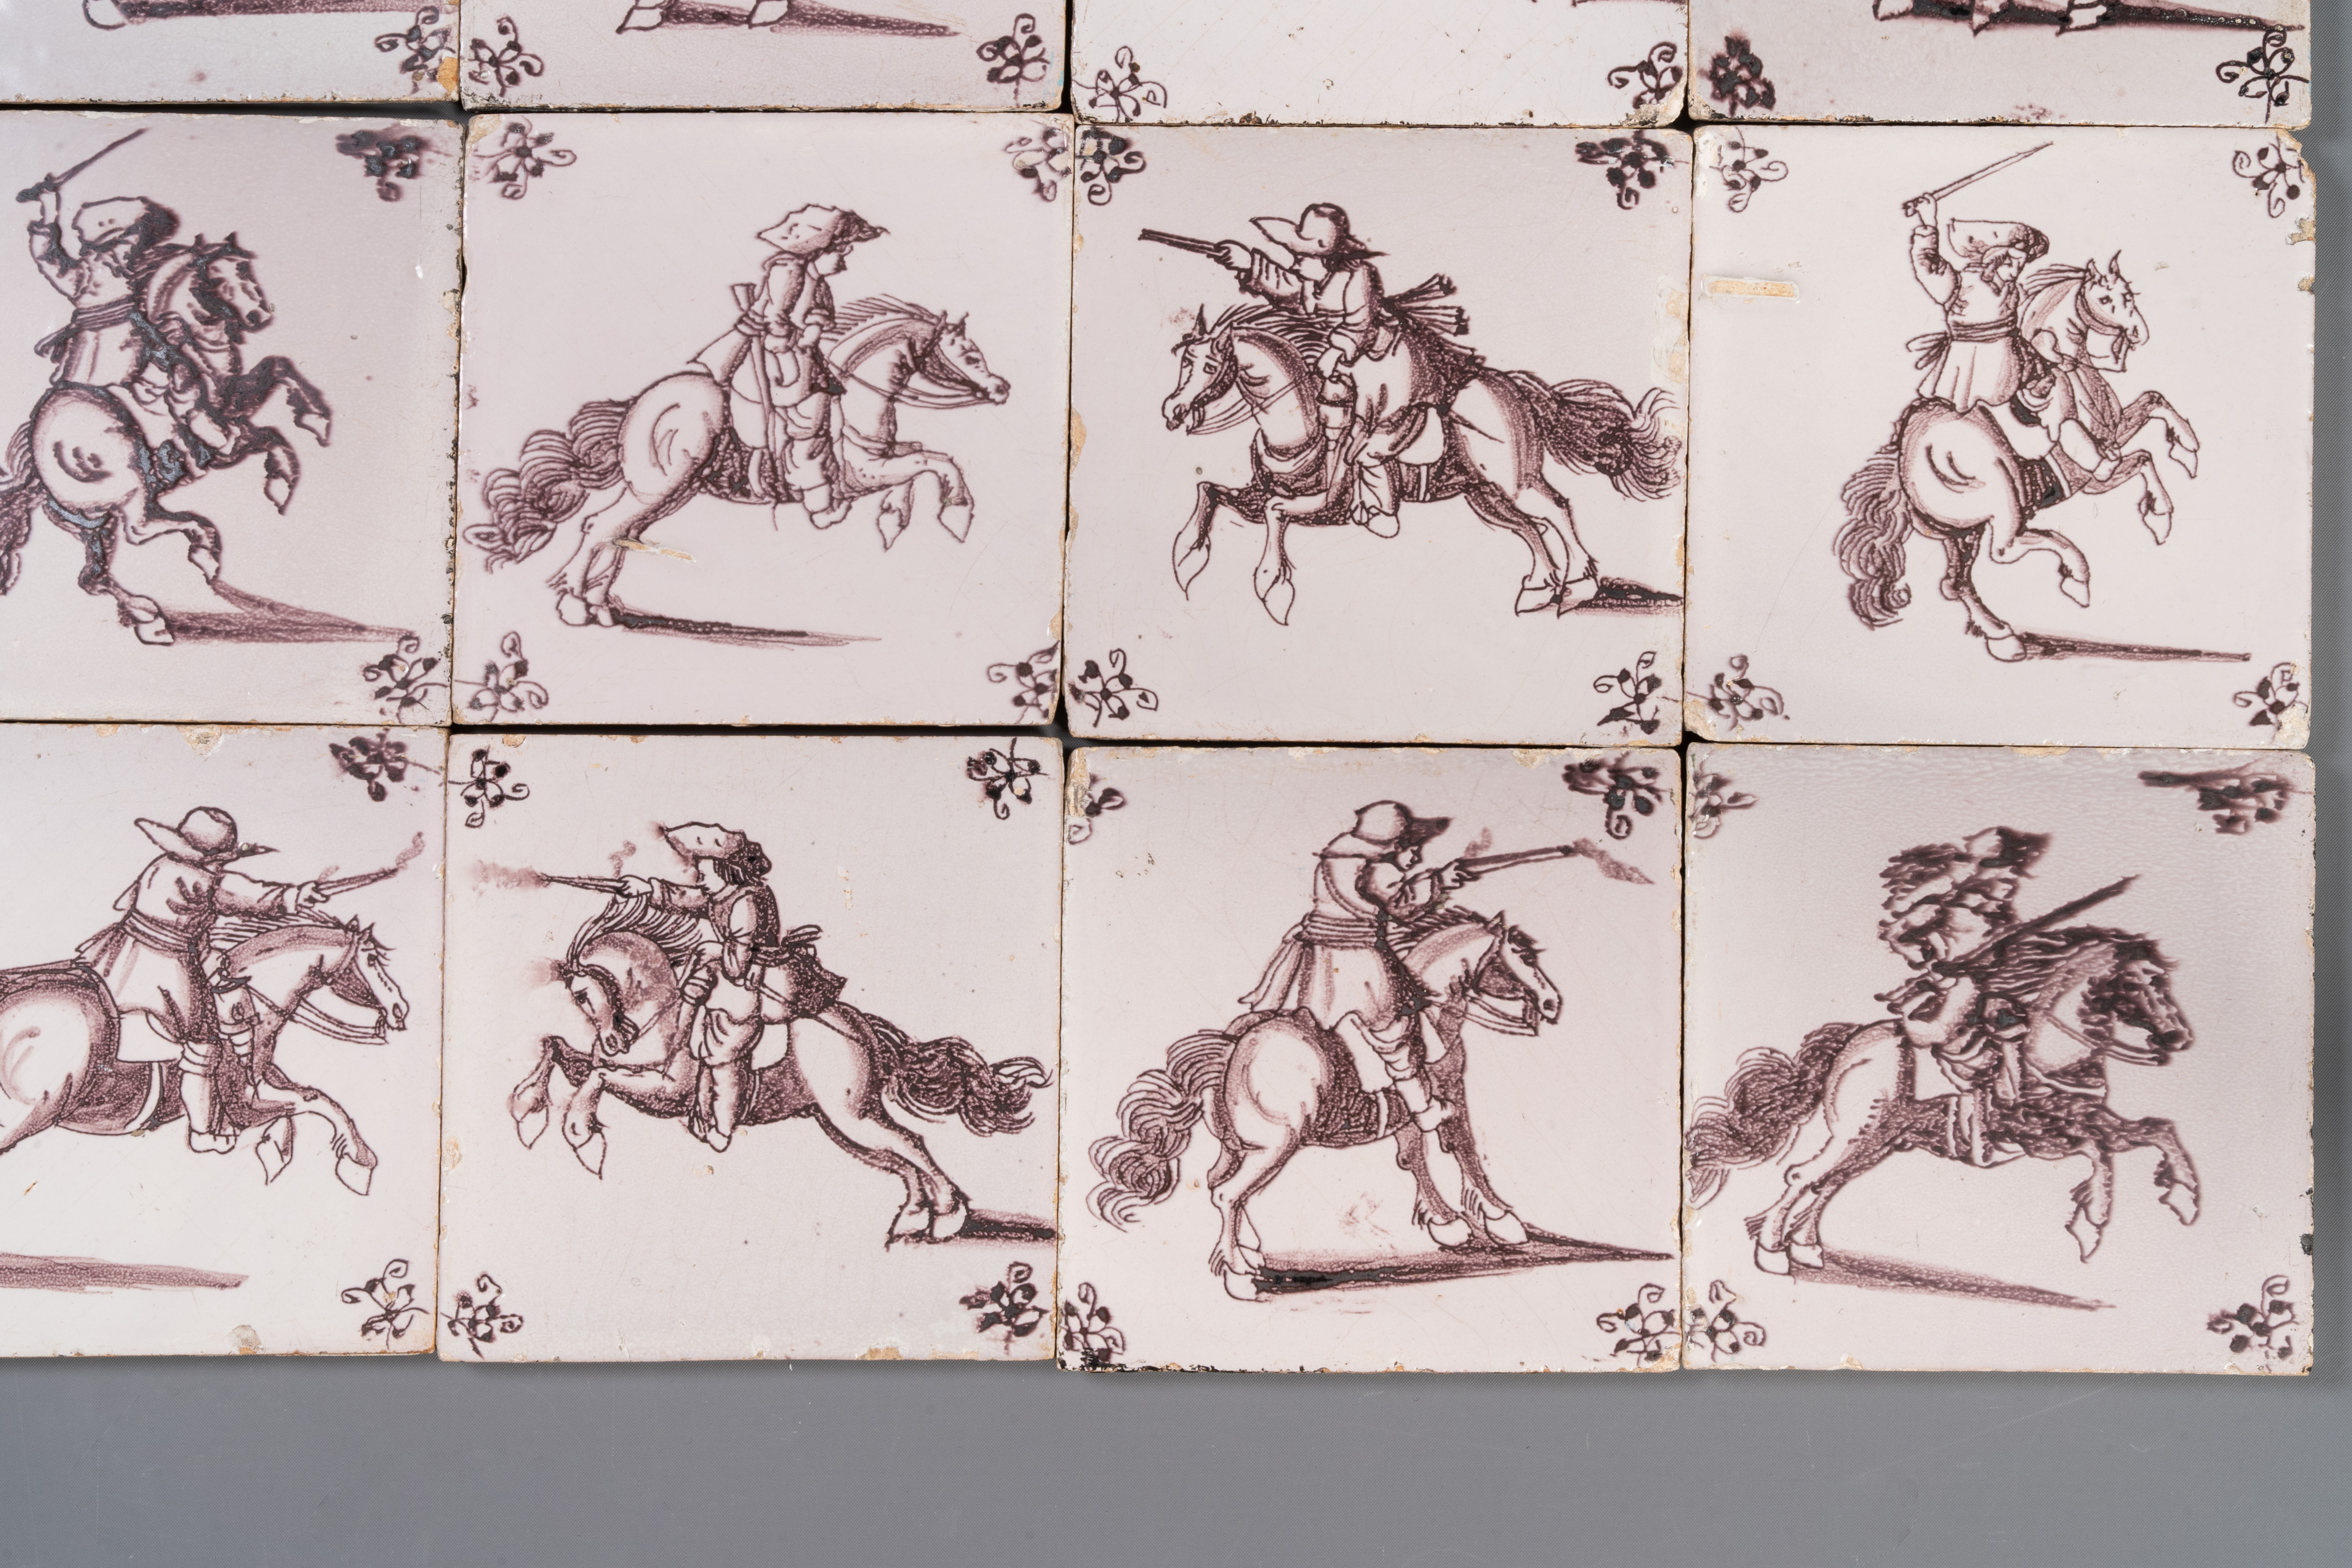 Fifteen Dutch Delft manganese tiles with horse riders, late 17th C. - Image 9 of 13